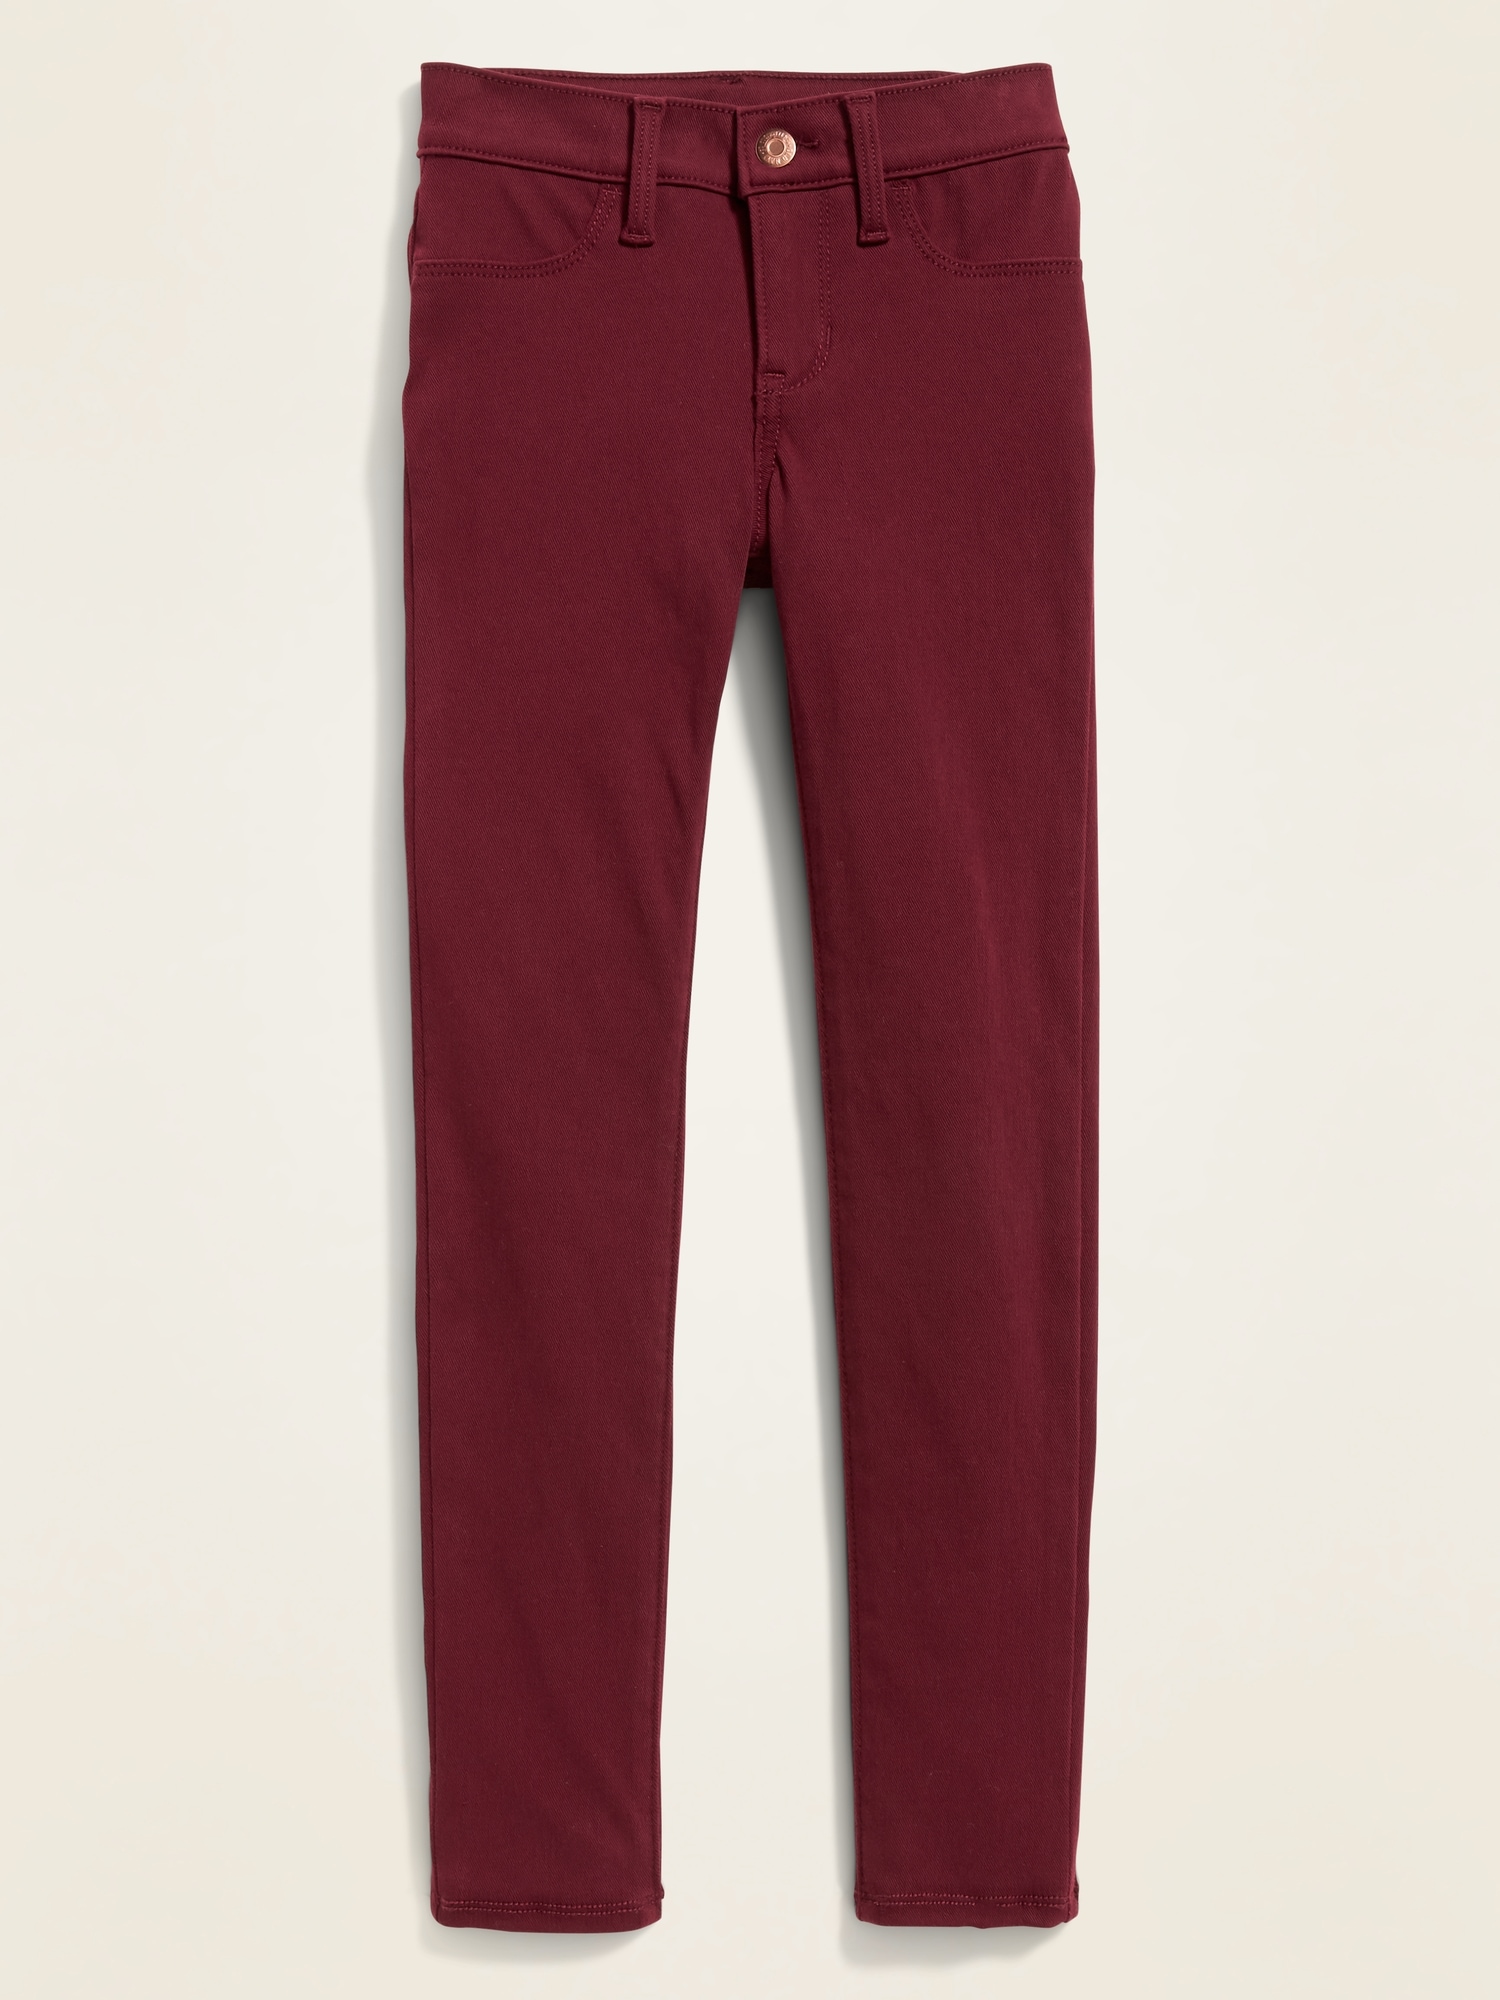 red snap jeans